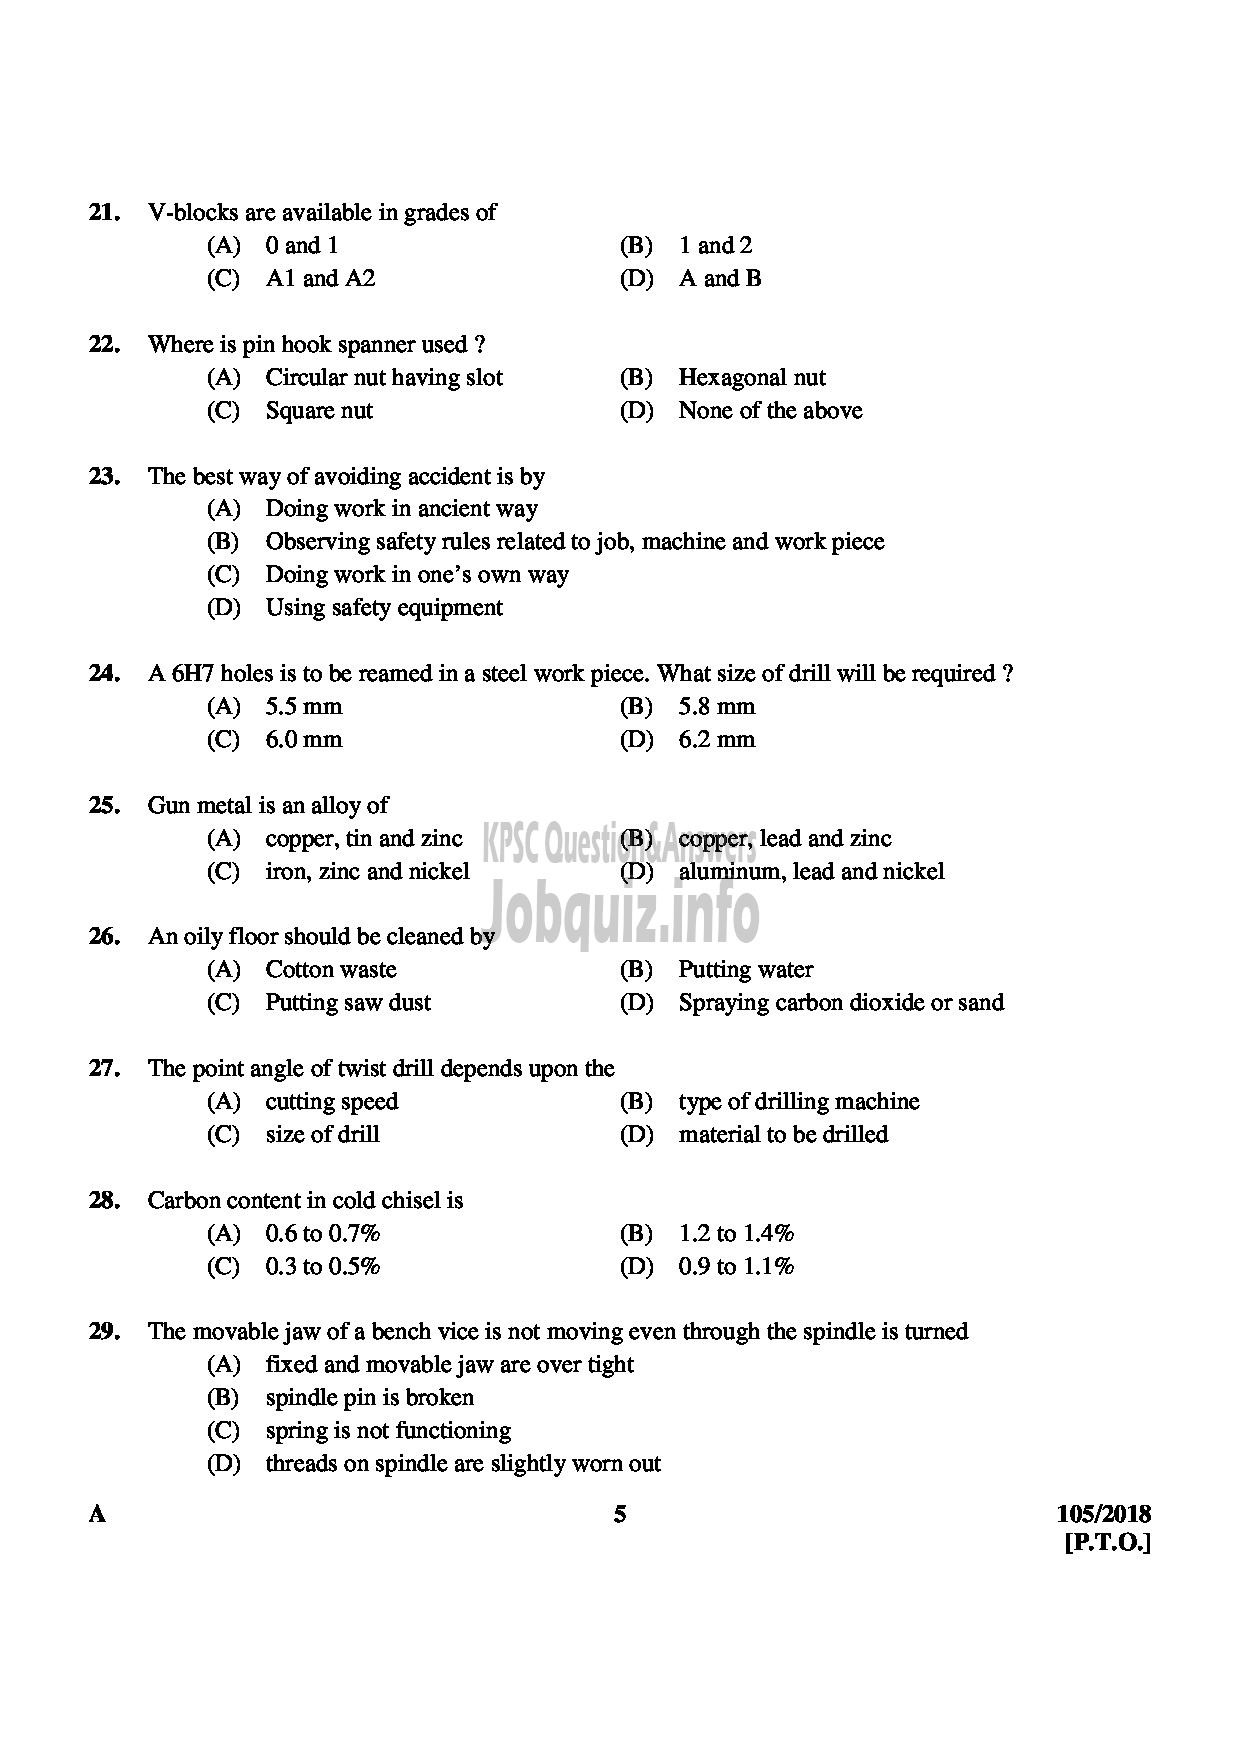 Kerala PSC Question Paper - JUNIOR INSTRUCTOR MACHINIST INDUSTRIAL TRAINING English -5